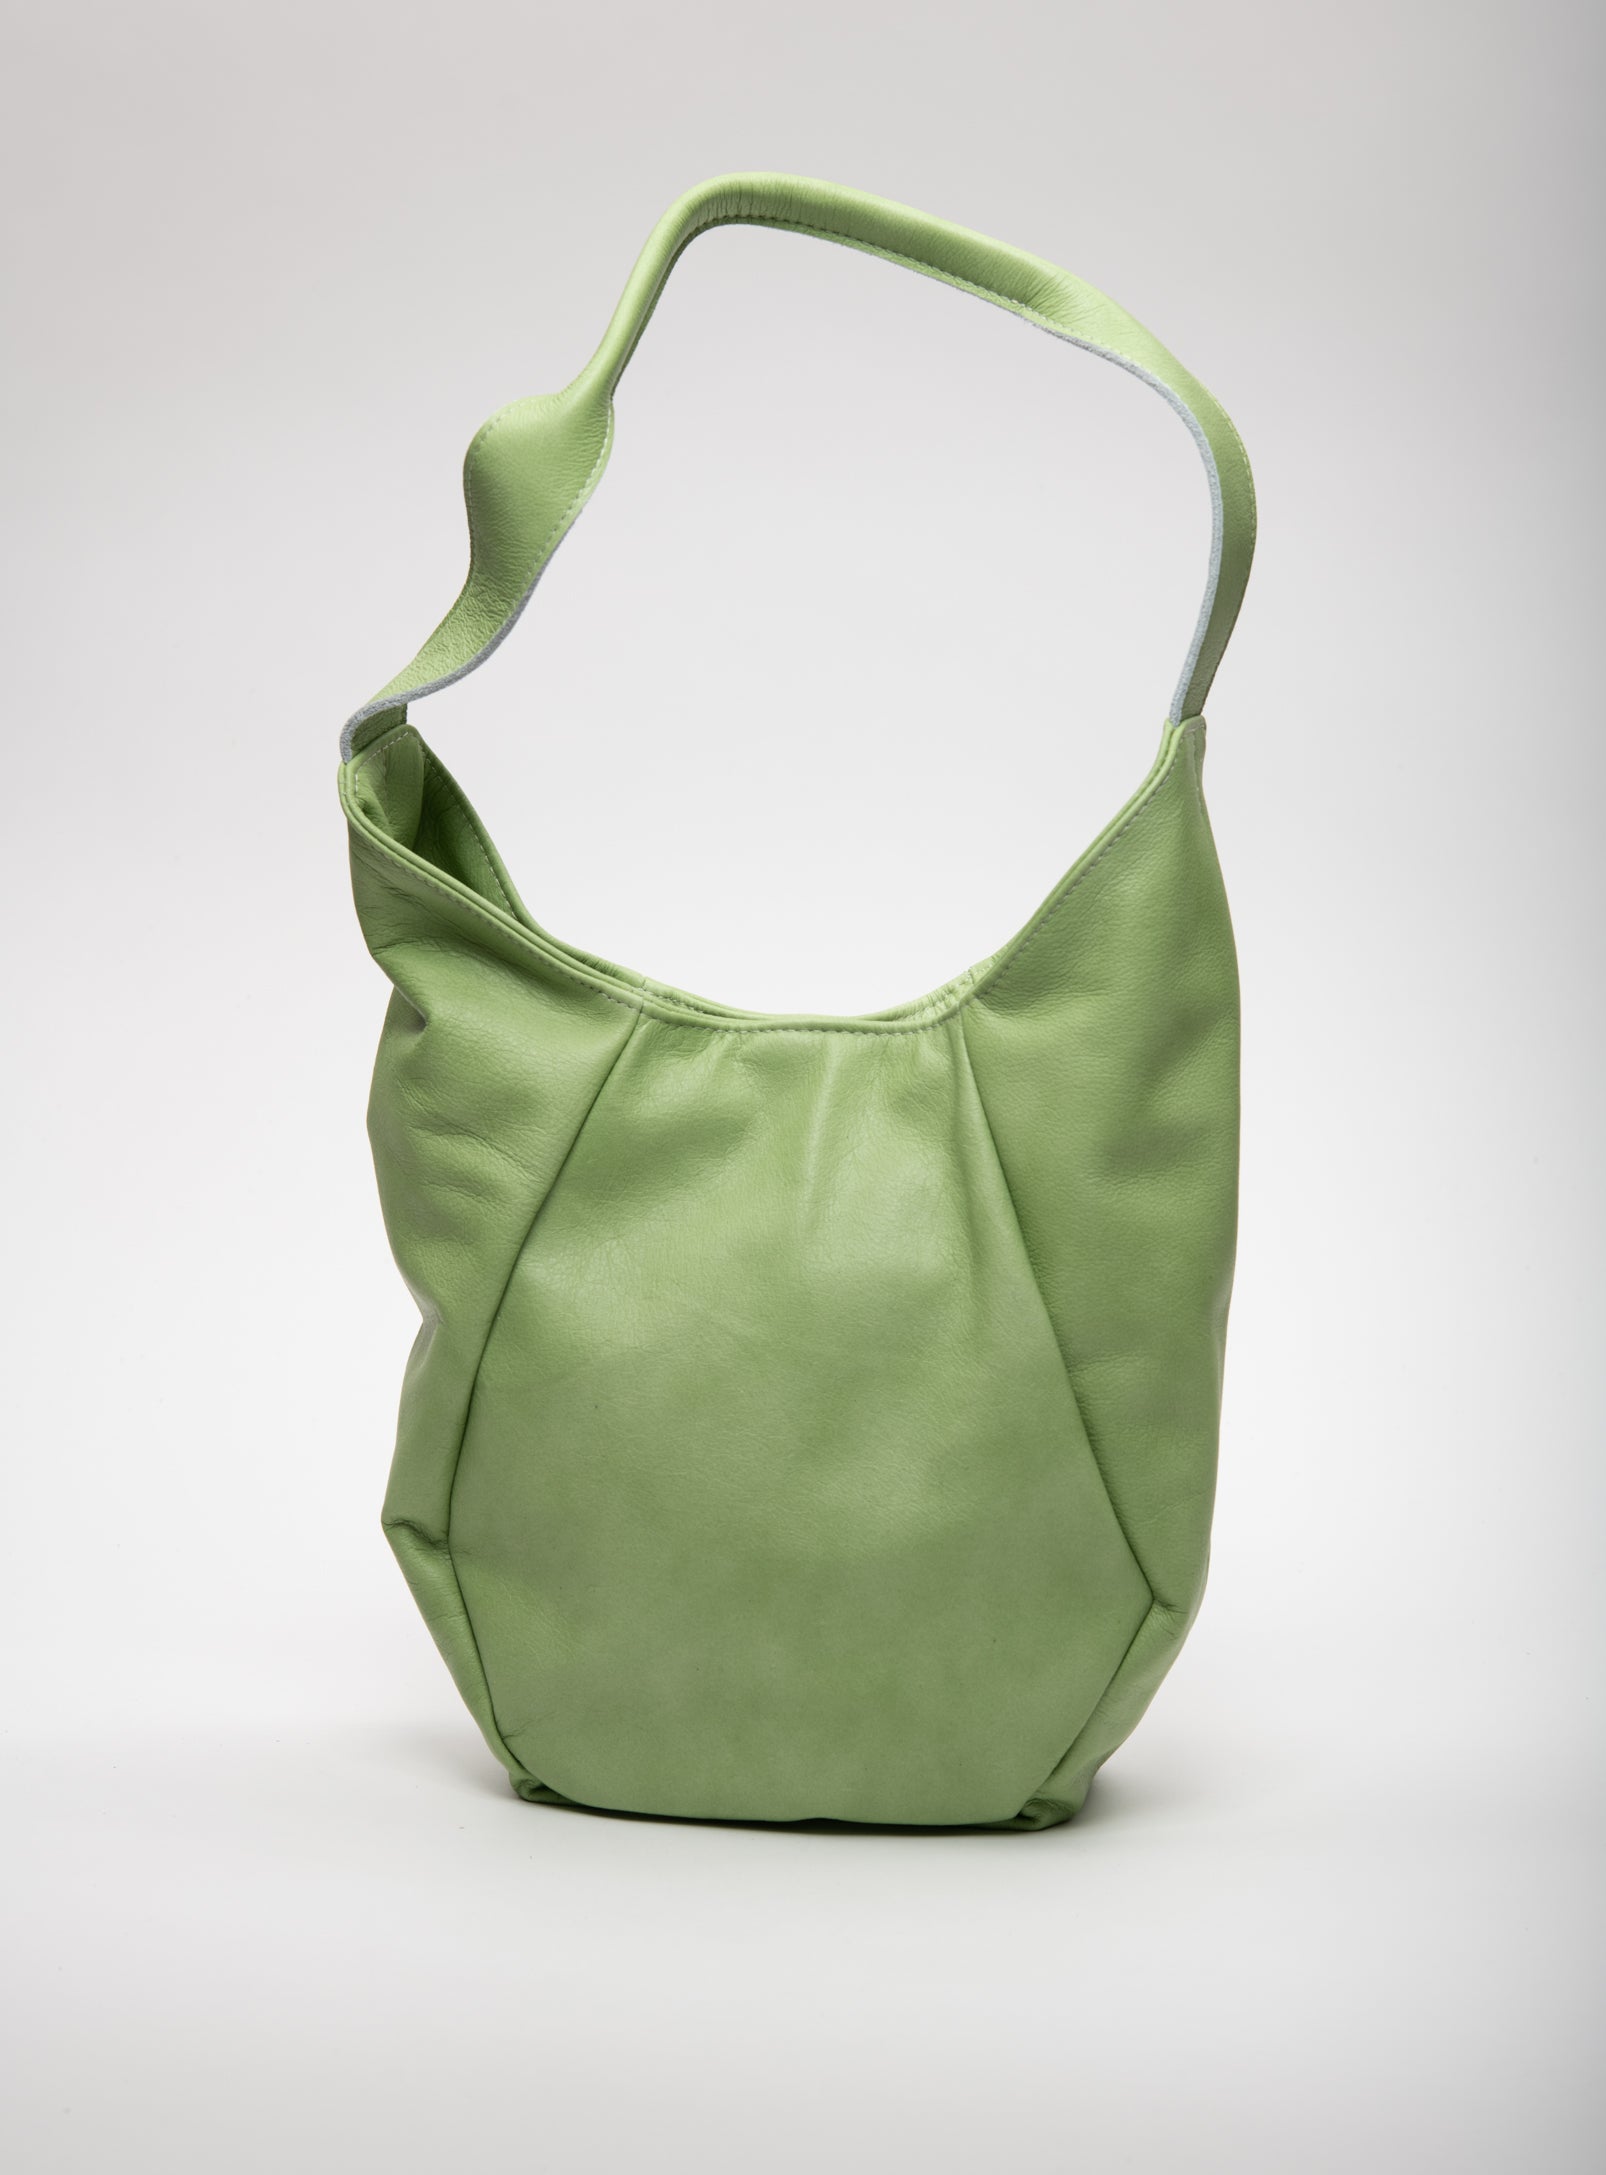 Geometrical leather tote bag MONT-ROYAL model, Veinage handmade in Montreal, Canada